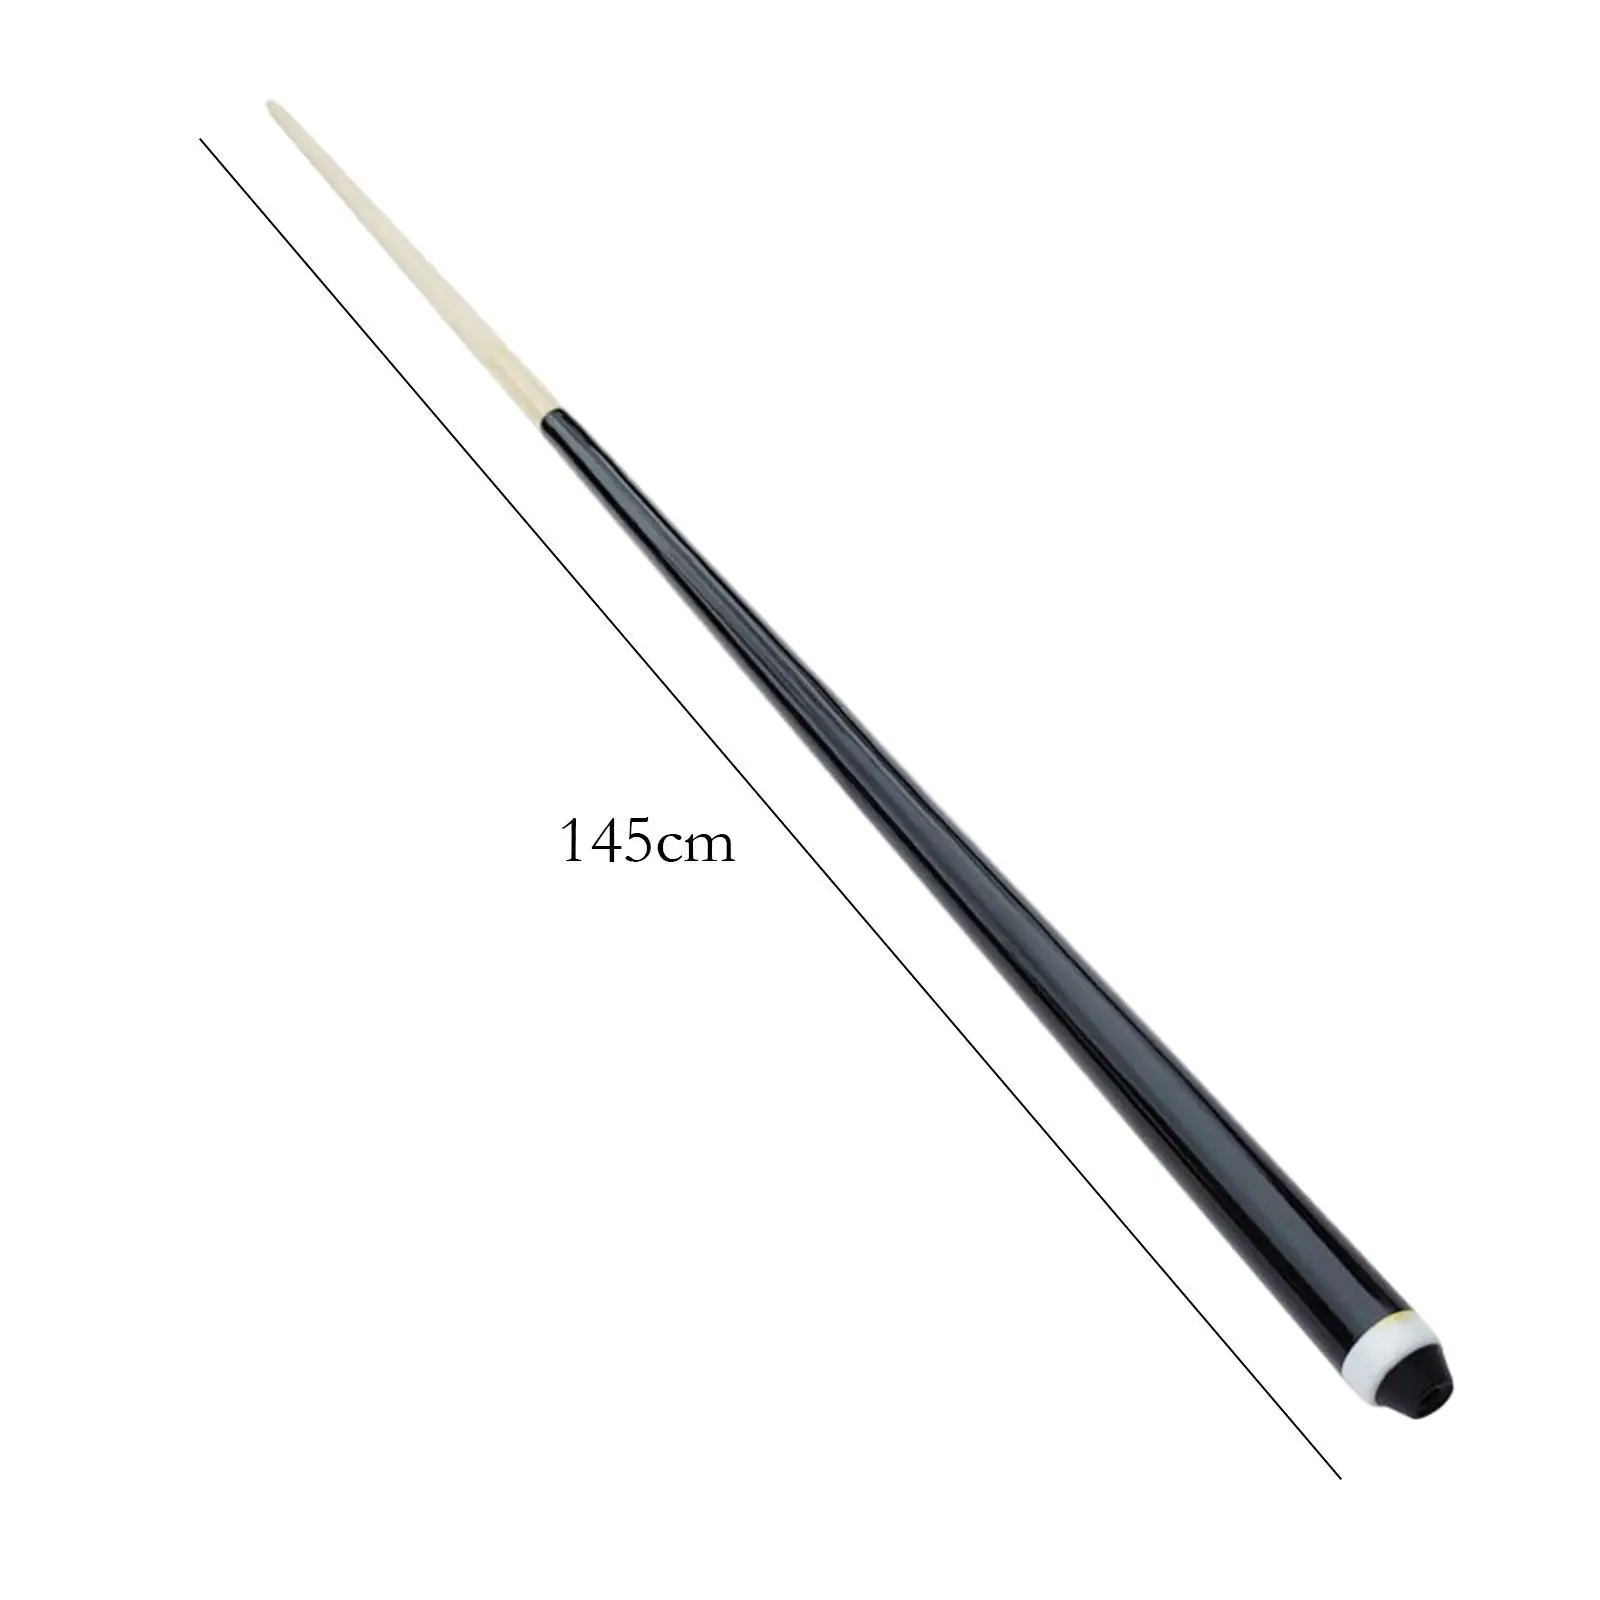 Billiard Cue Stick Wooden Pool Stick 57inch Pool Table Sticks for Snooker Billiard Table Sports Competition Practice Accessories